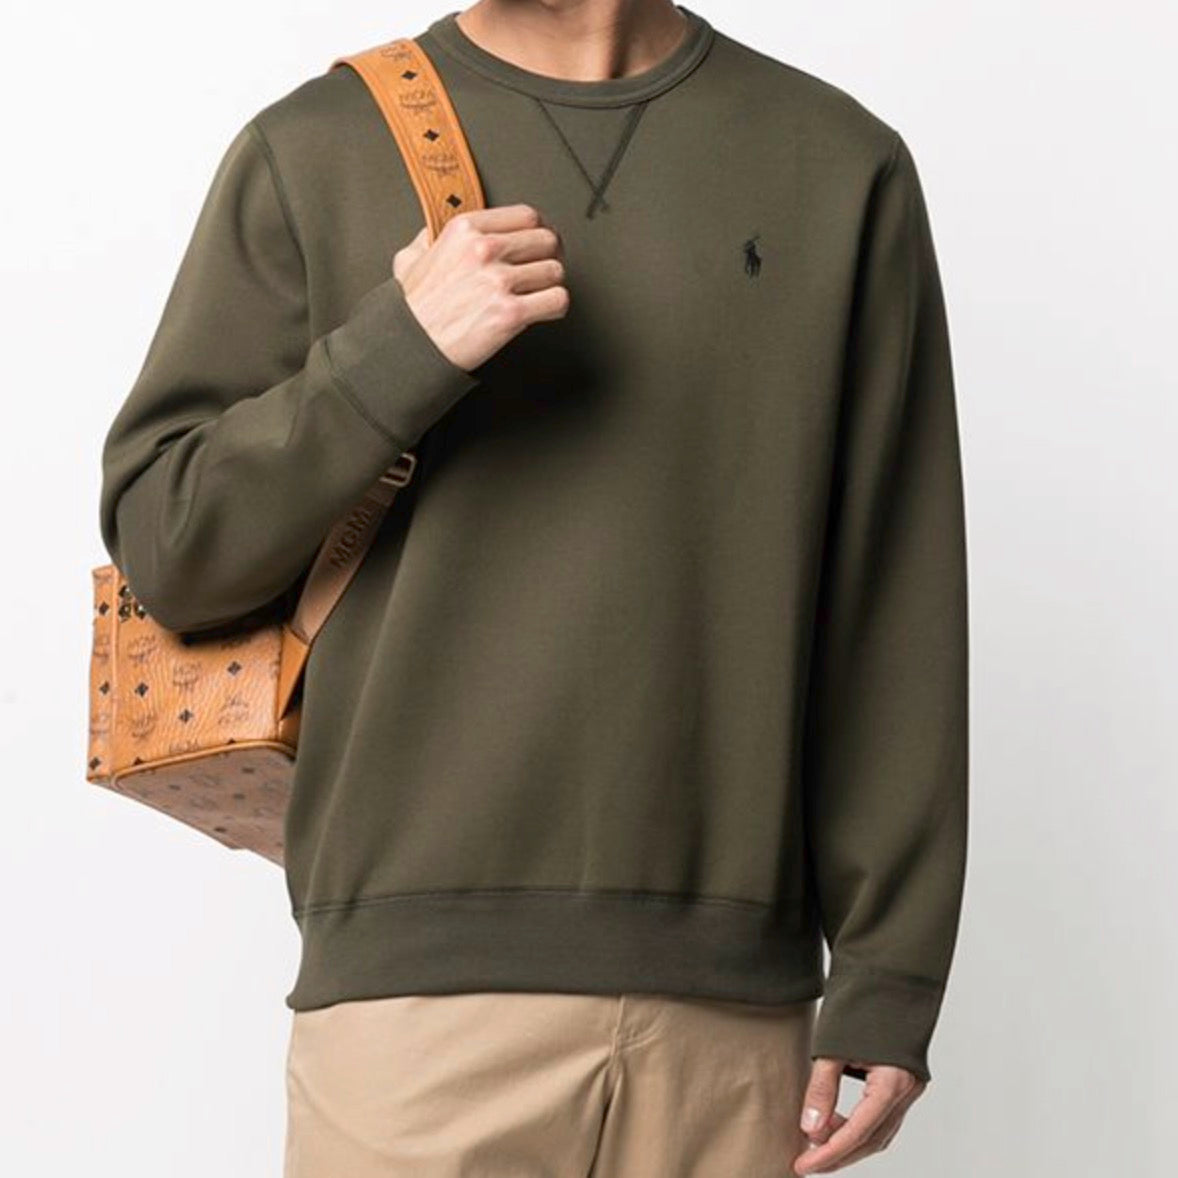 Cut from smooth double-knit fabric, this sweatshirt is a sporty Polo must-have.